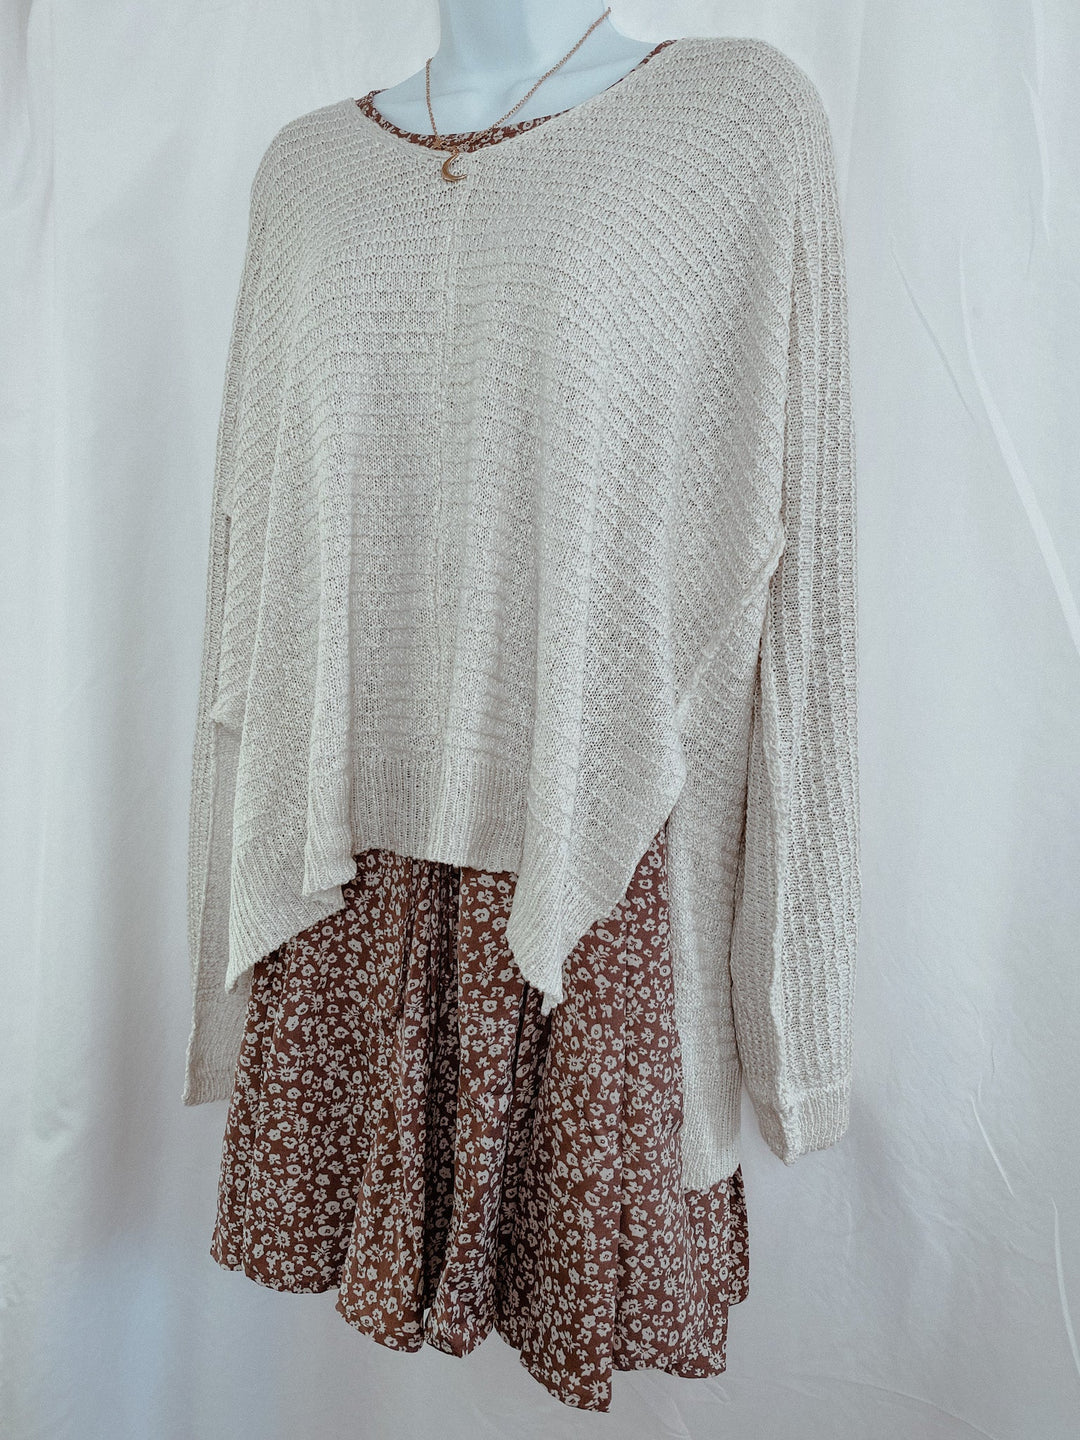 Relaxed Fit Cream Textured Sweater - Sweater